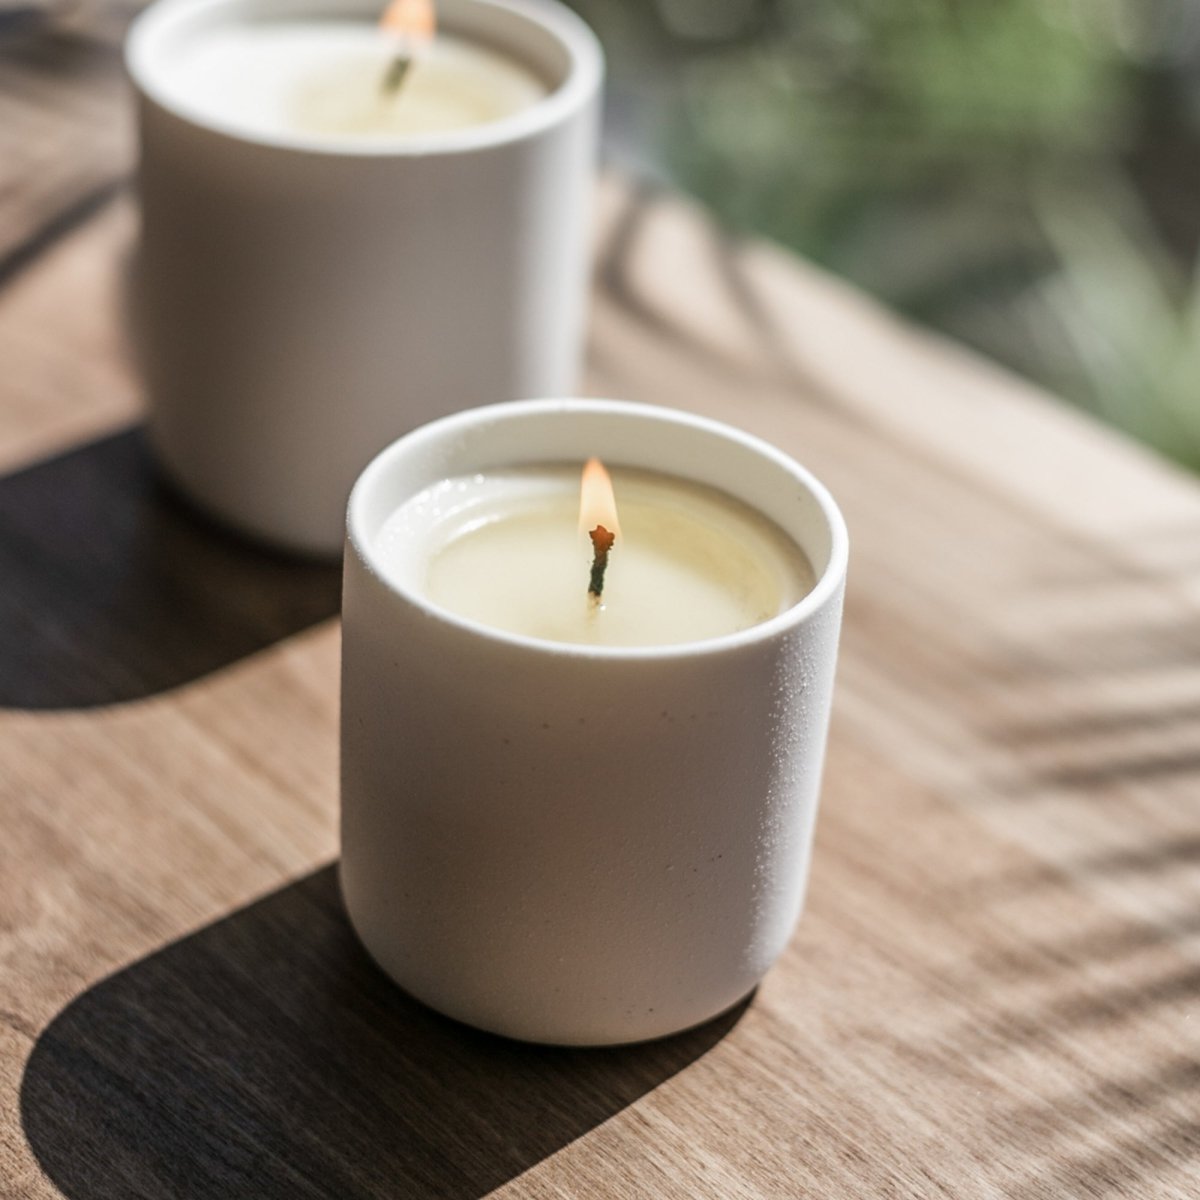 Porto Boutique 118 - Soy Wax Scented Candle - lily & onyx